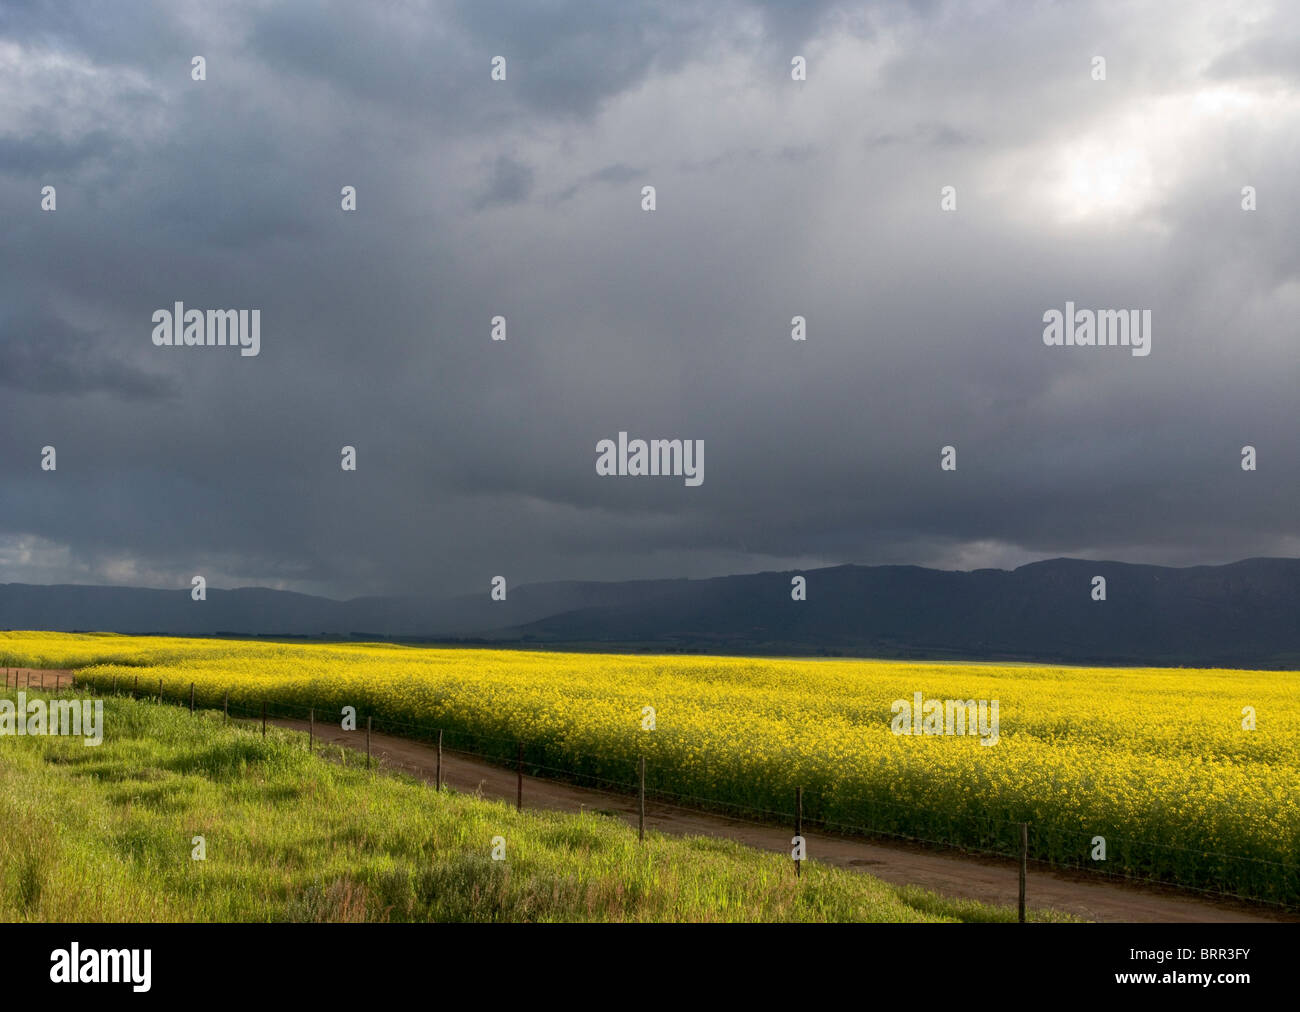 A field of canola flowers under a brooding grey sky Stock Photo